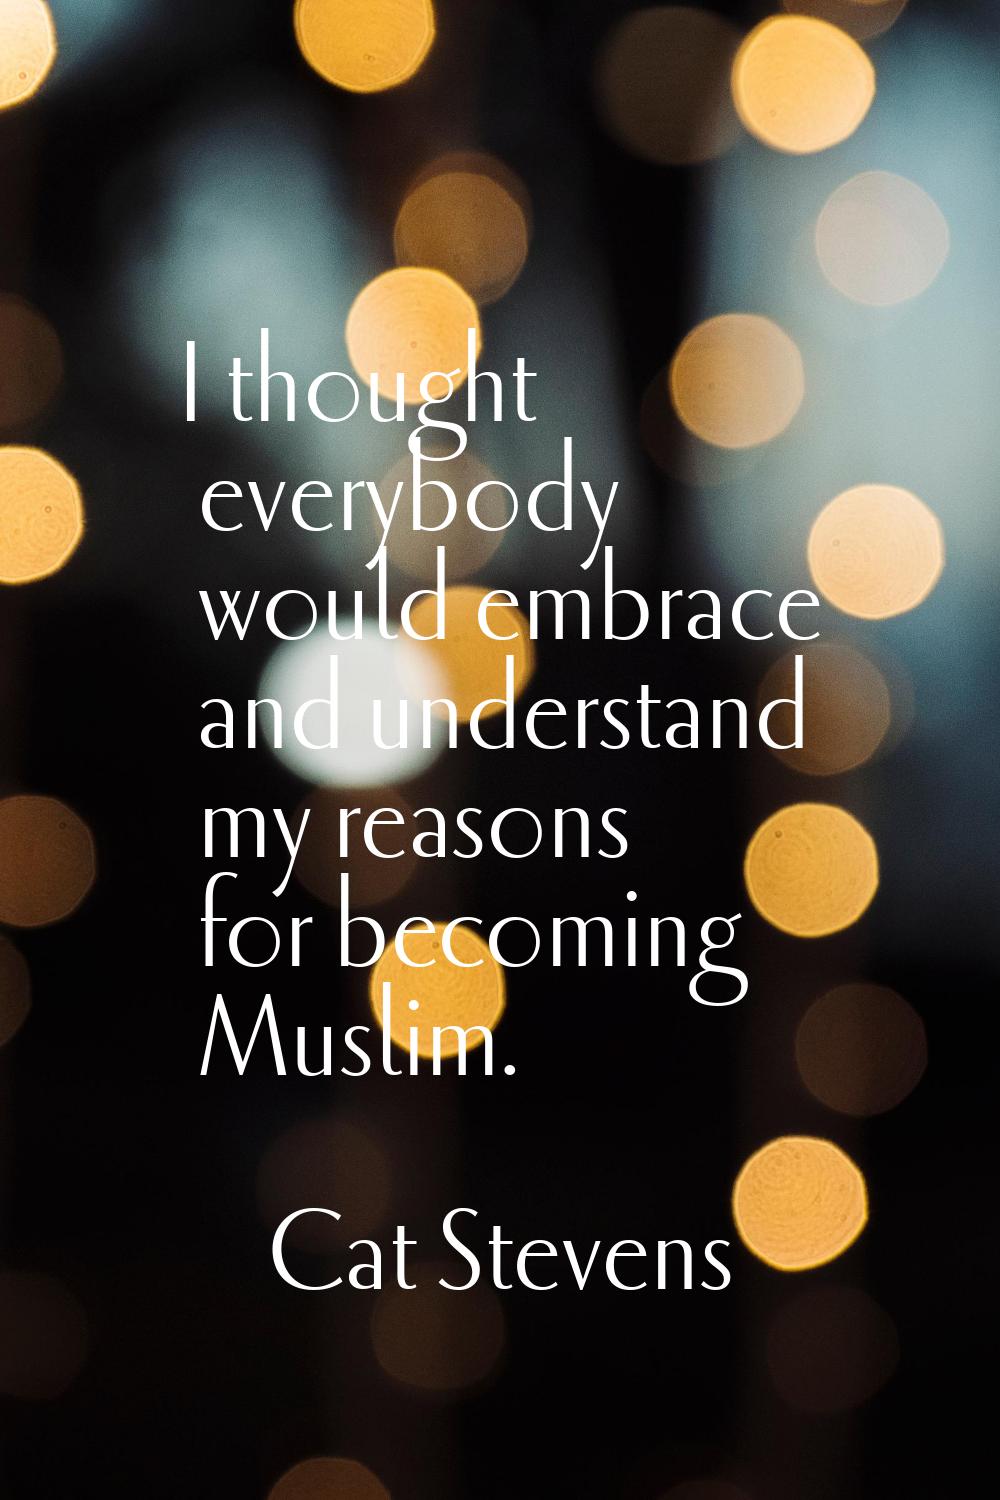 I thought everybody would embrace and understand my reasons for becoming Muslim.